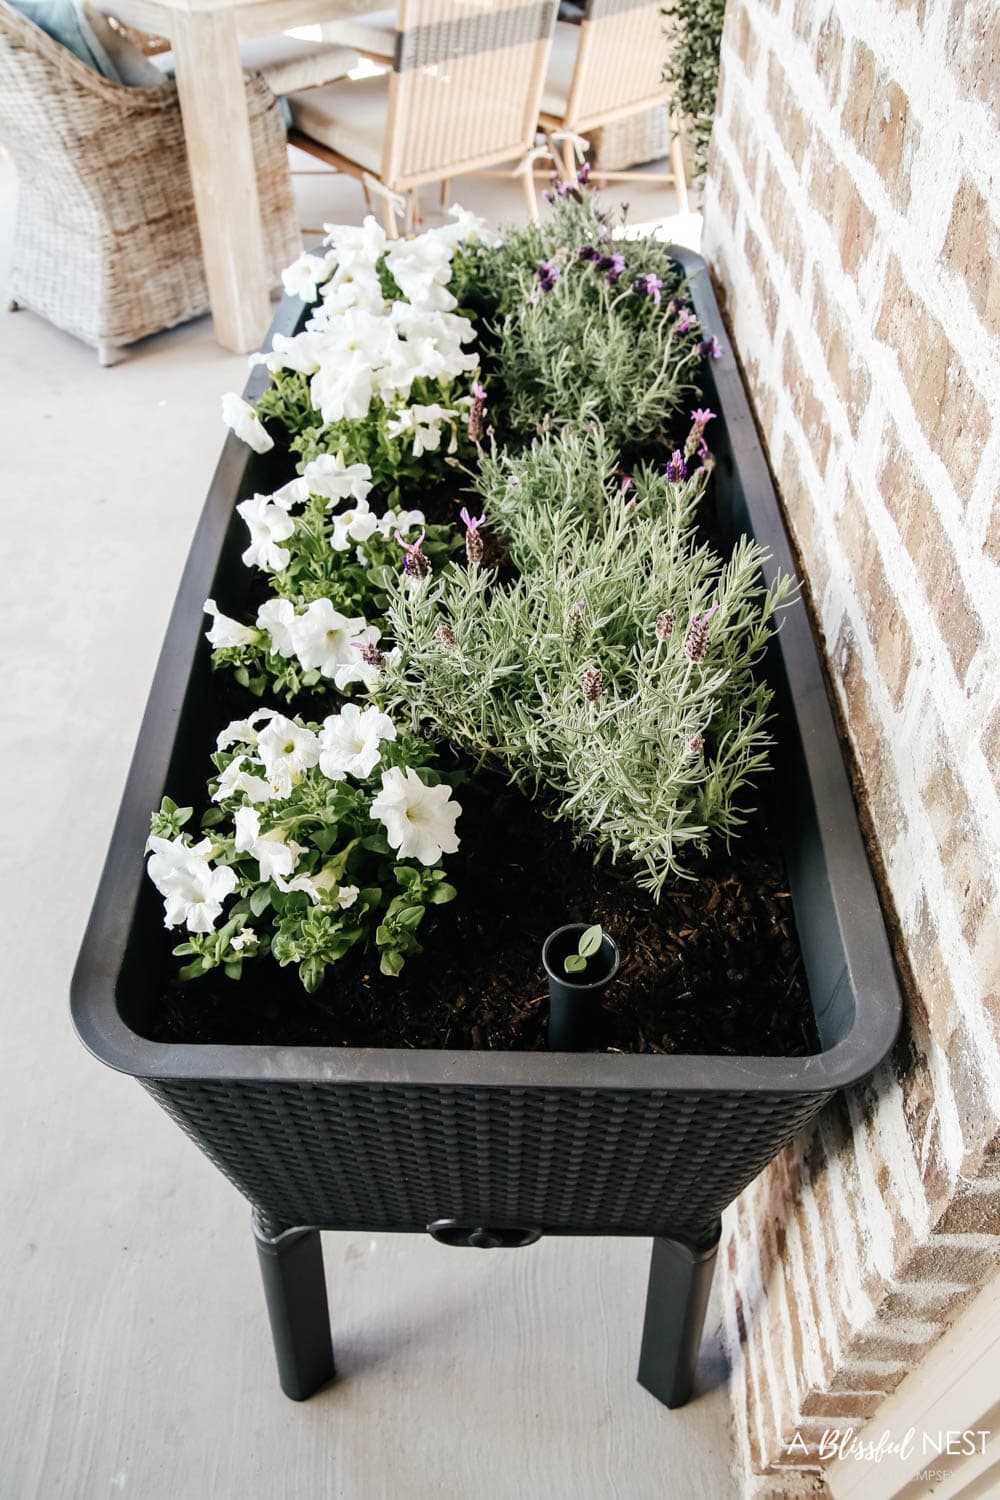 White flowers mixed with lavender plants in a raised planter